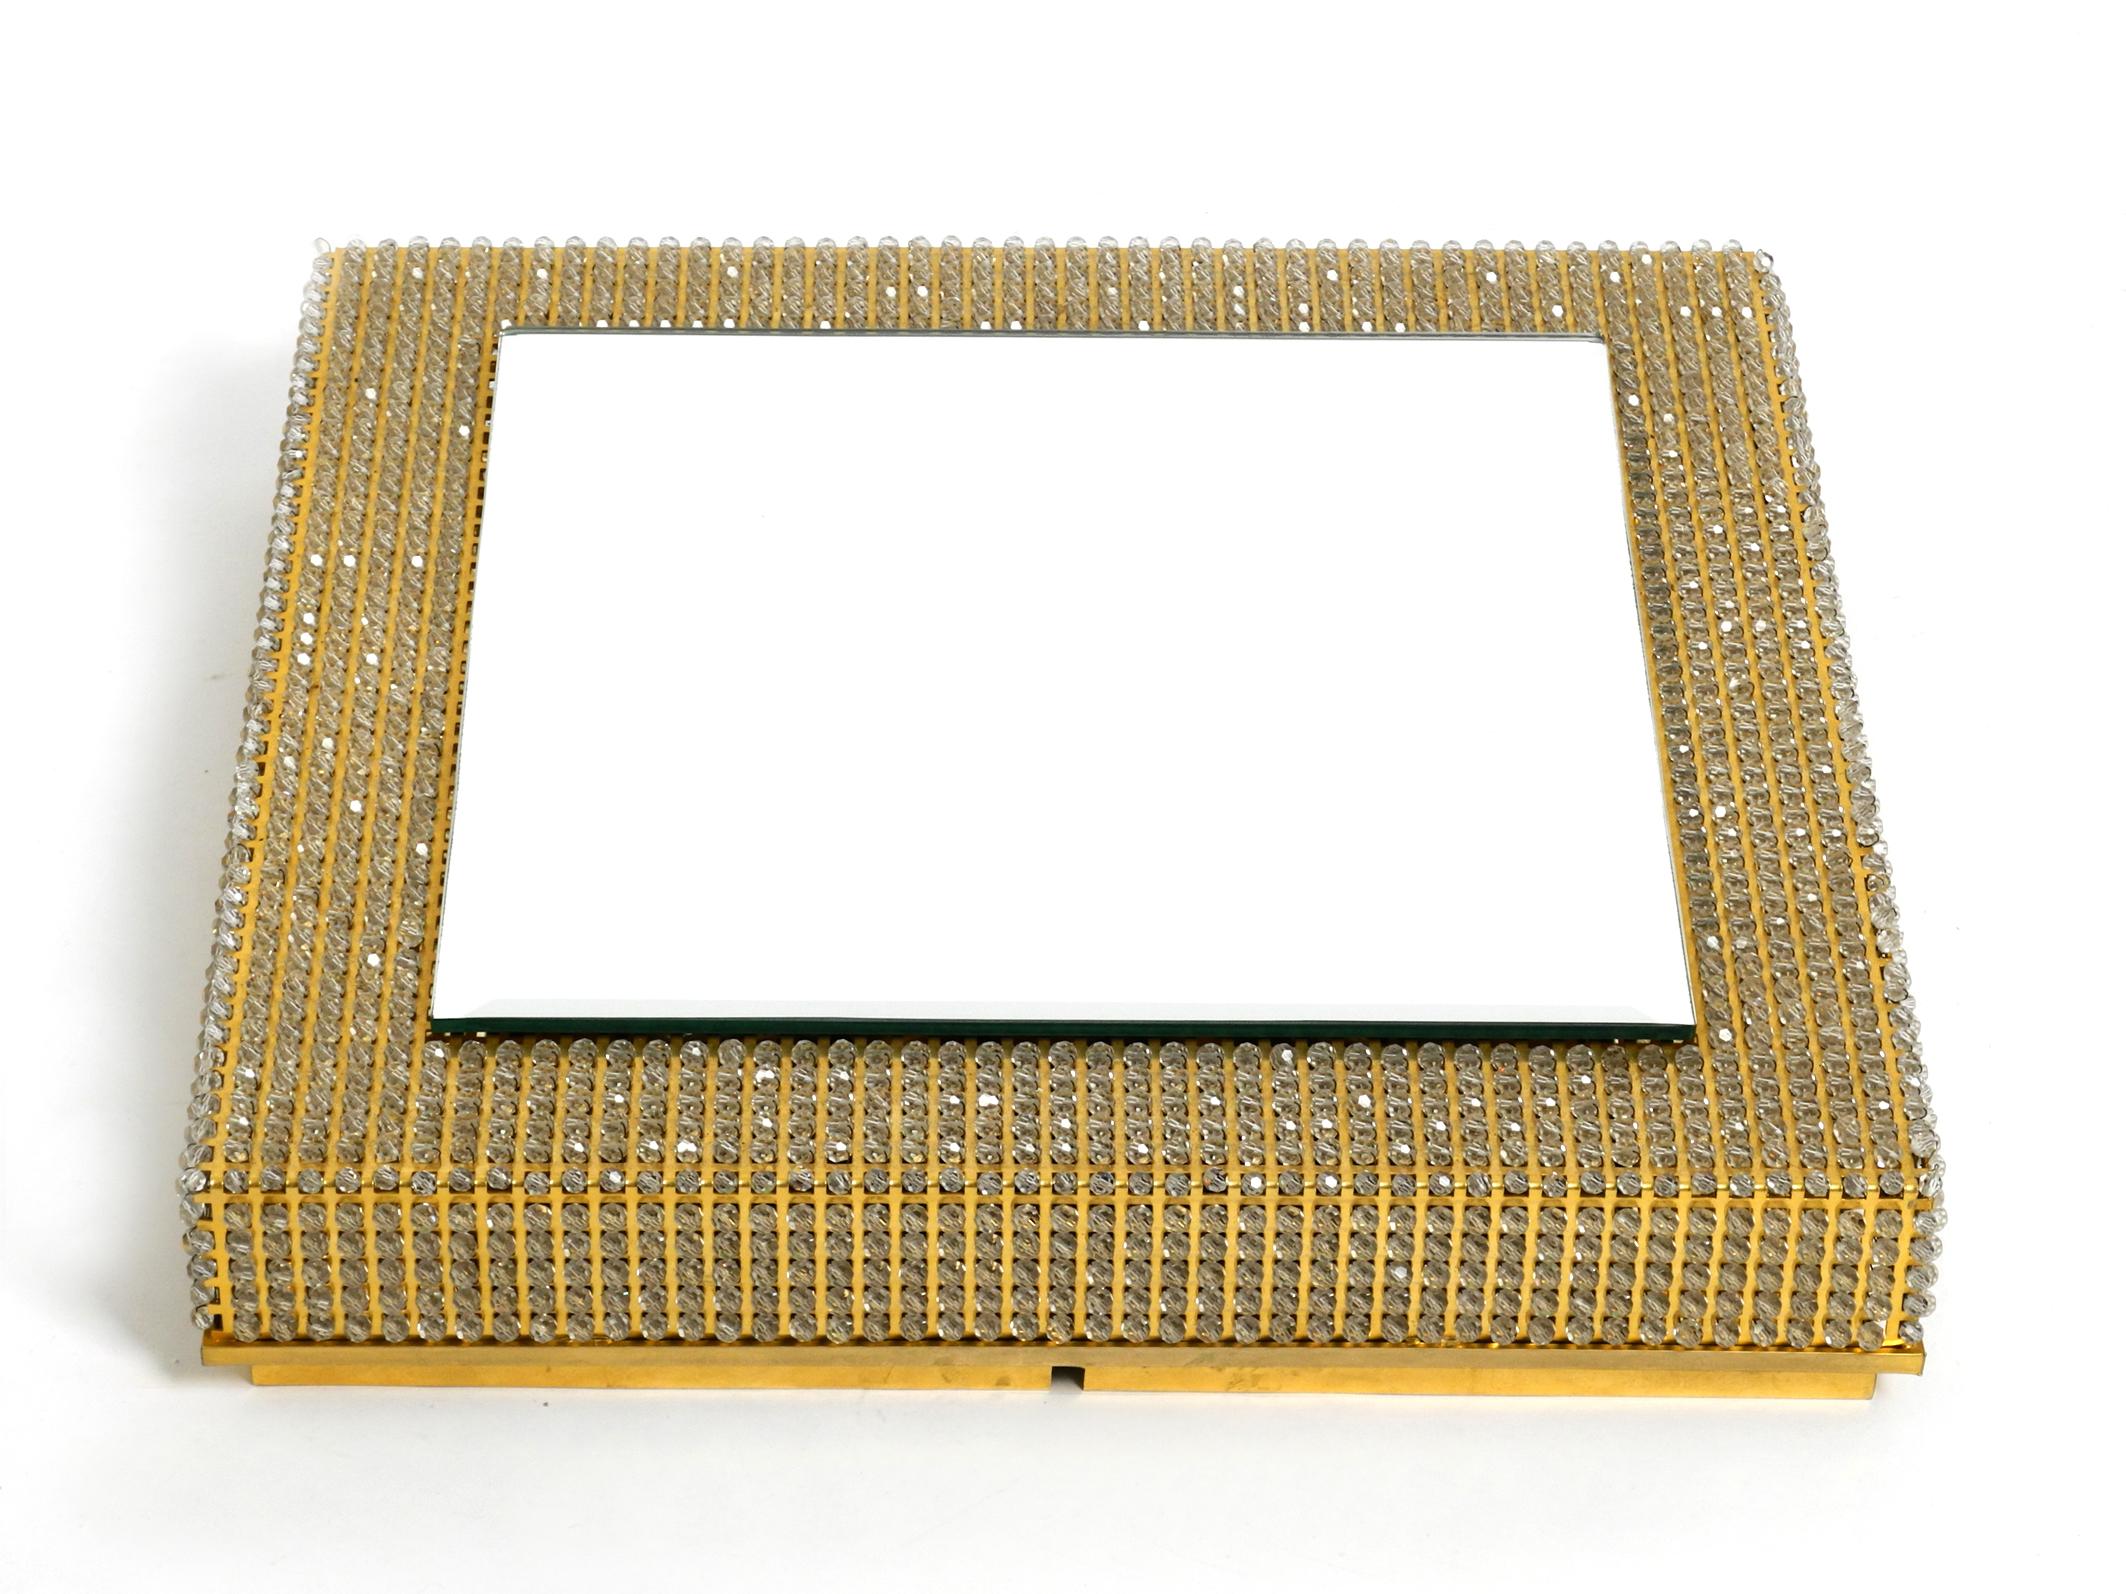 German Rare Square 1960s Brass Wall Backlit Mirror, Frame with Glass Beads by Palwa For Sale